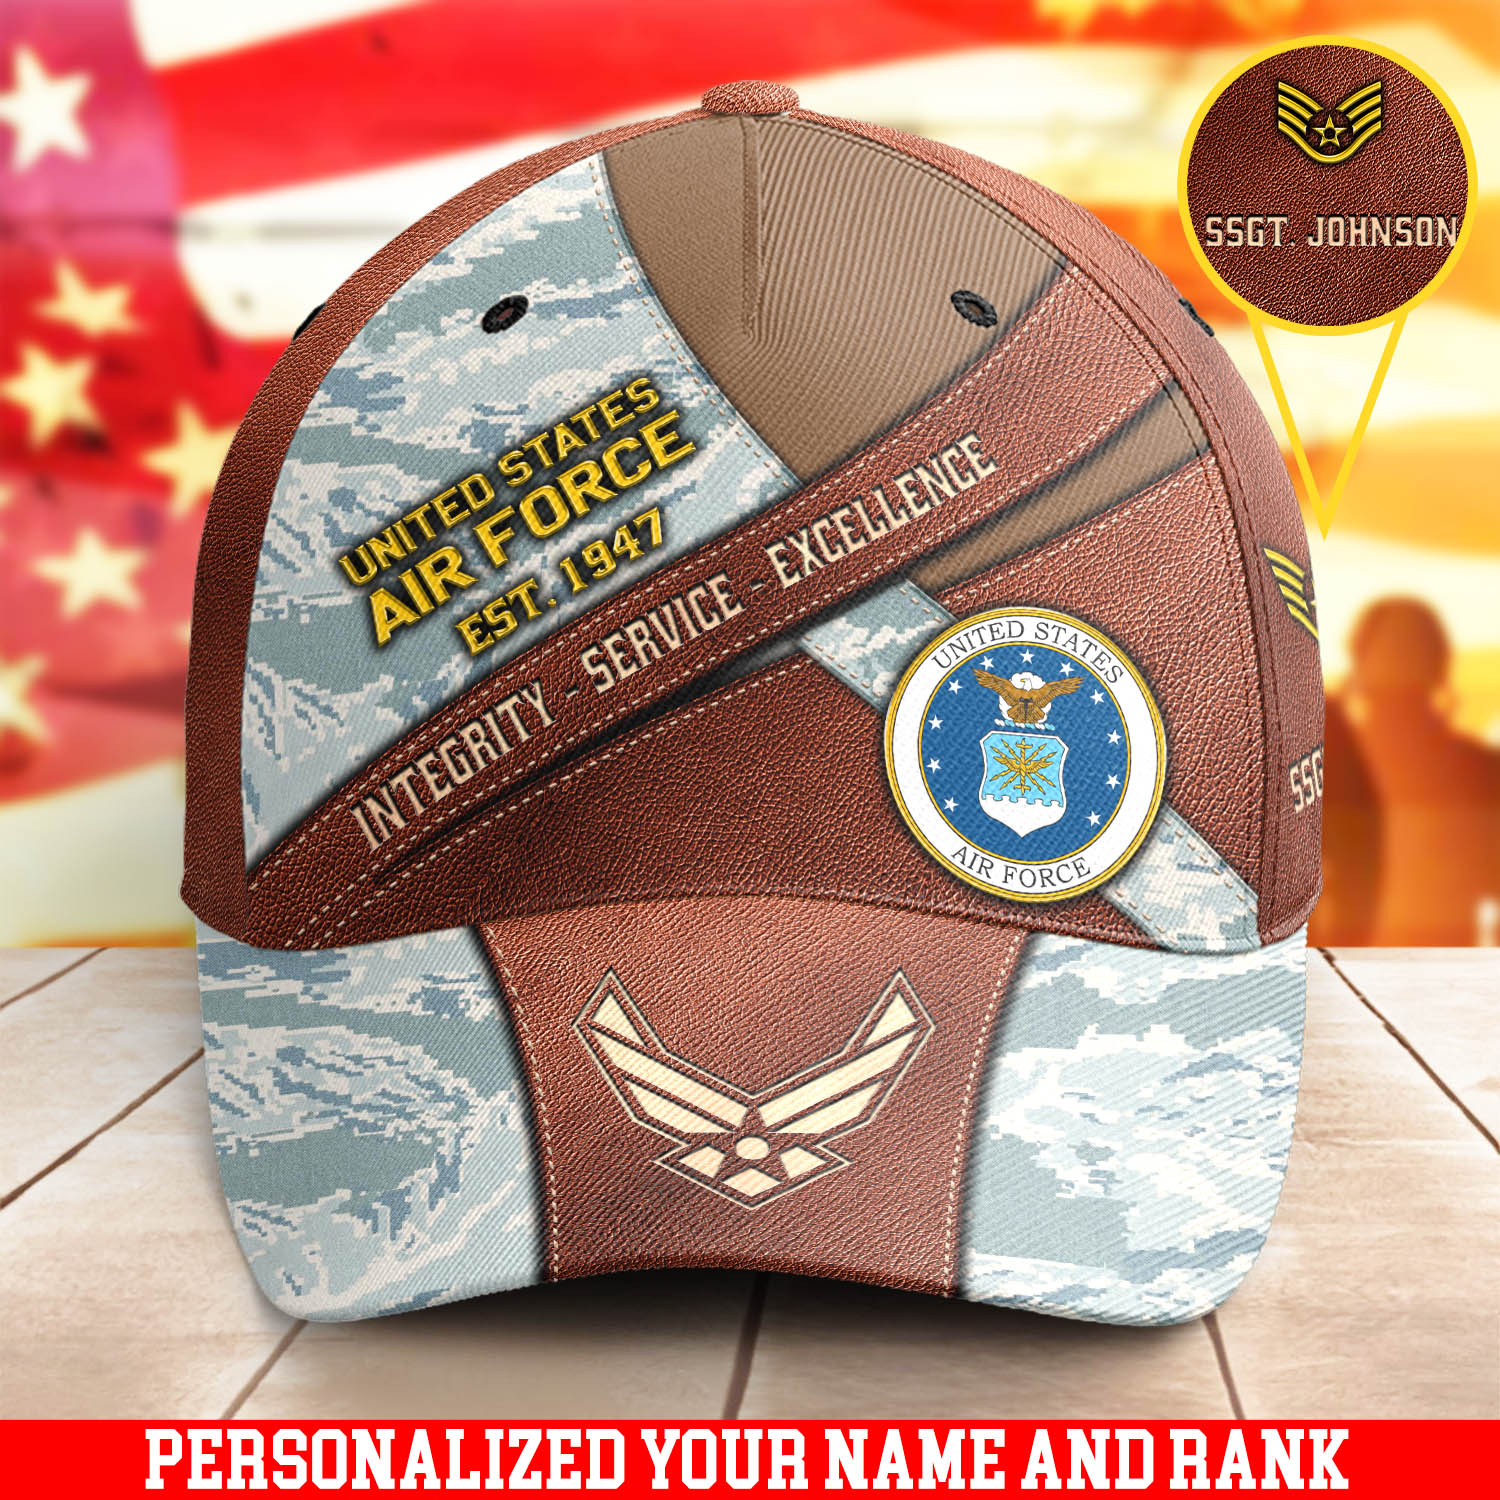 U.S. Air Force Cap New Version Personalized Your Name And Rank, Camouflage Cap For US Military, US Military Gifts ETHY-57782